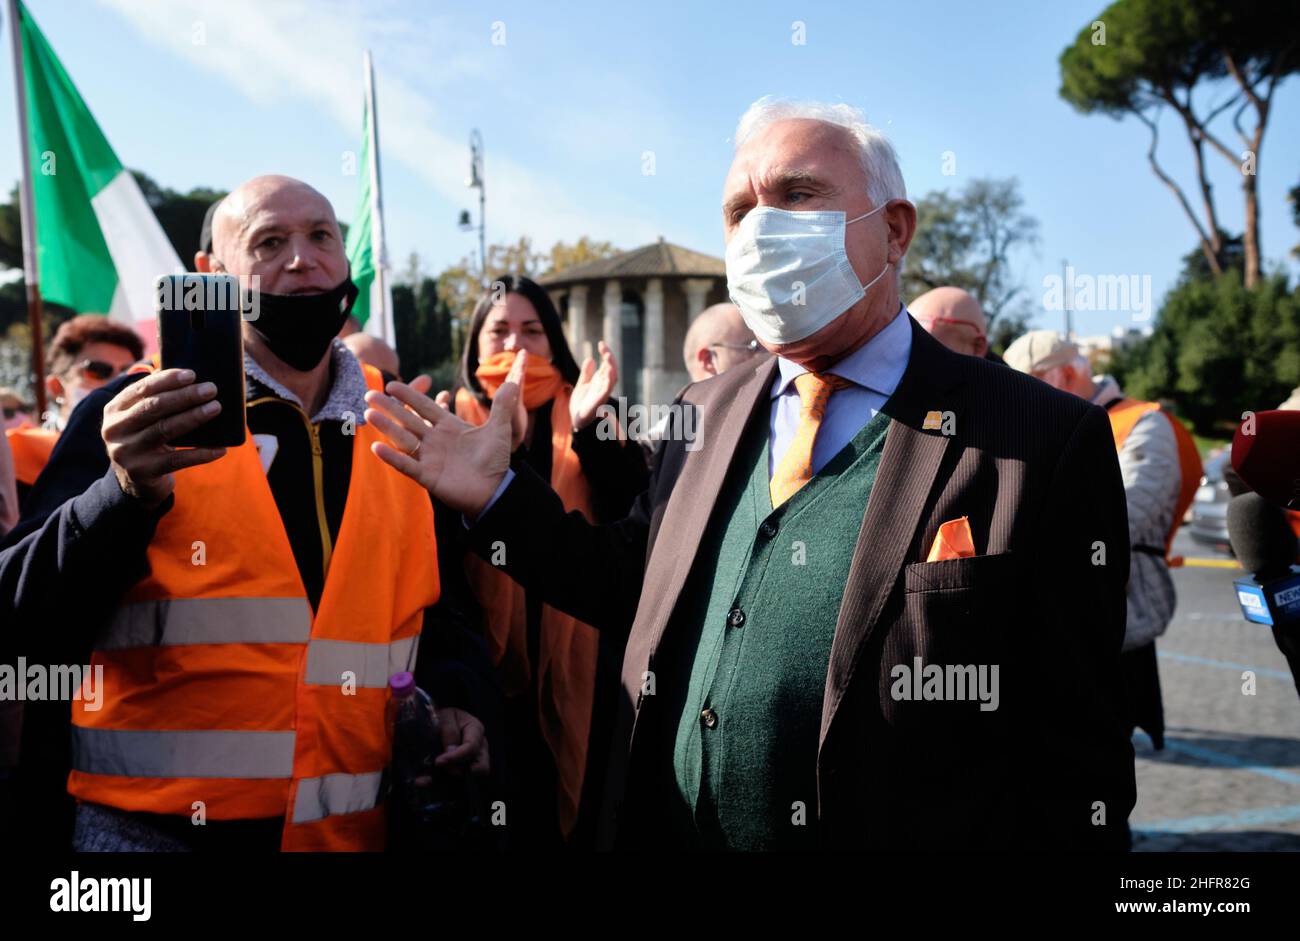 Mauro Scrobogna /LaPresse November 07, 2020&#xa0; Rome, Italy News Coronavirus, protests against health emergency decrees and lock down In the photo: Former Carabinieri General Antonio Pappalardo, current leader of the Orange Vests during the meager demonstration against the recent DPCM provisions which establish forms of partial lock down Stock Photo